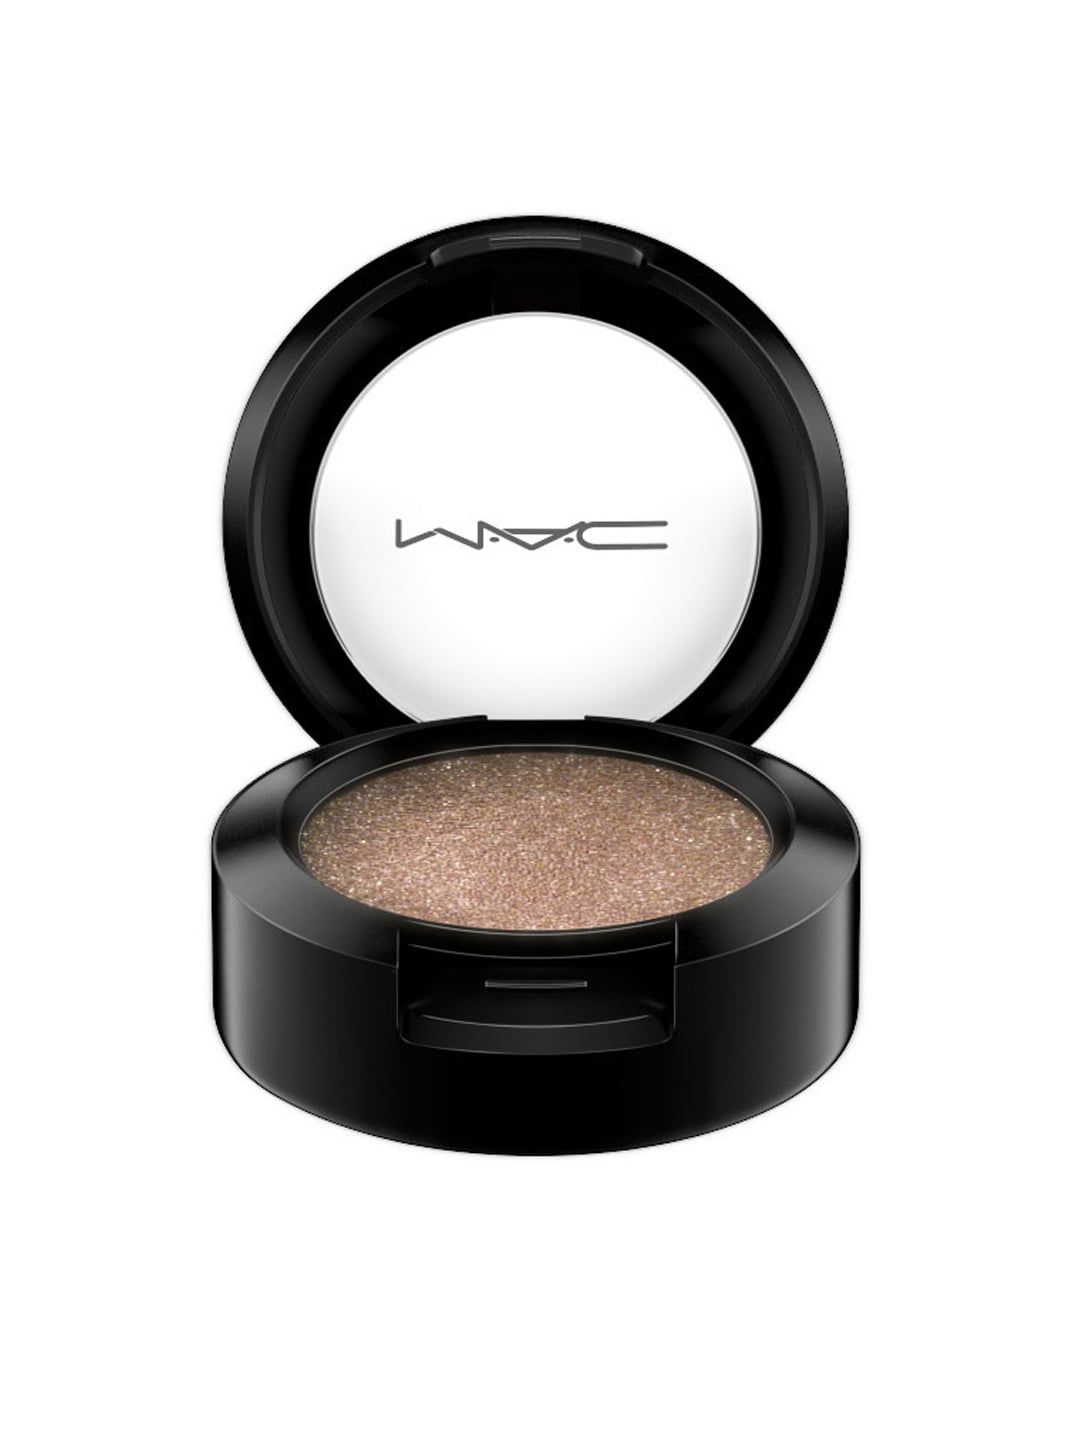 M.A.C Lustre Eye Shadow - Tempting 1.5g Price in India